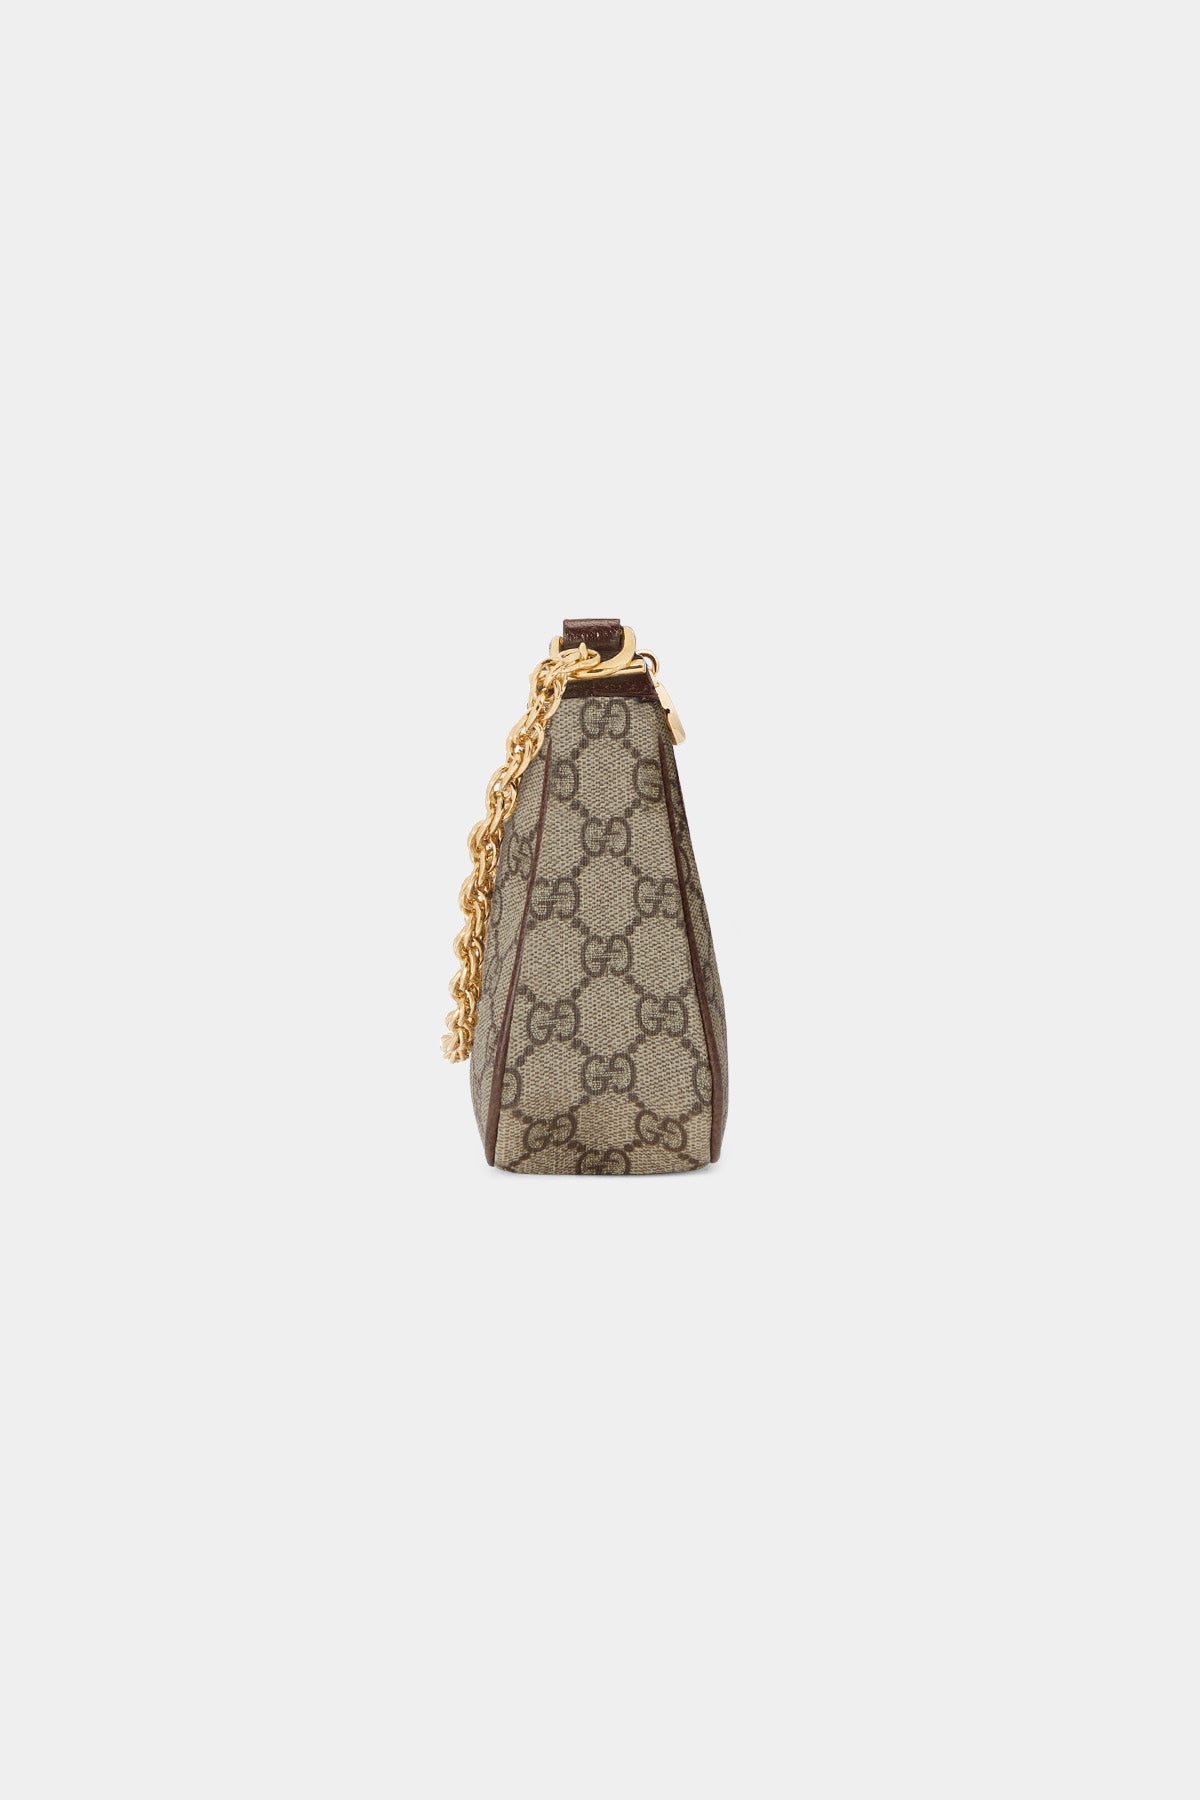 8 Iconic Gucci Bags That You Won't Regret Buying | Preview.ph